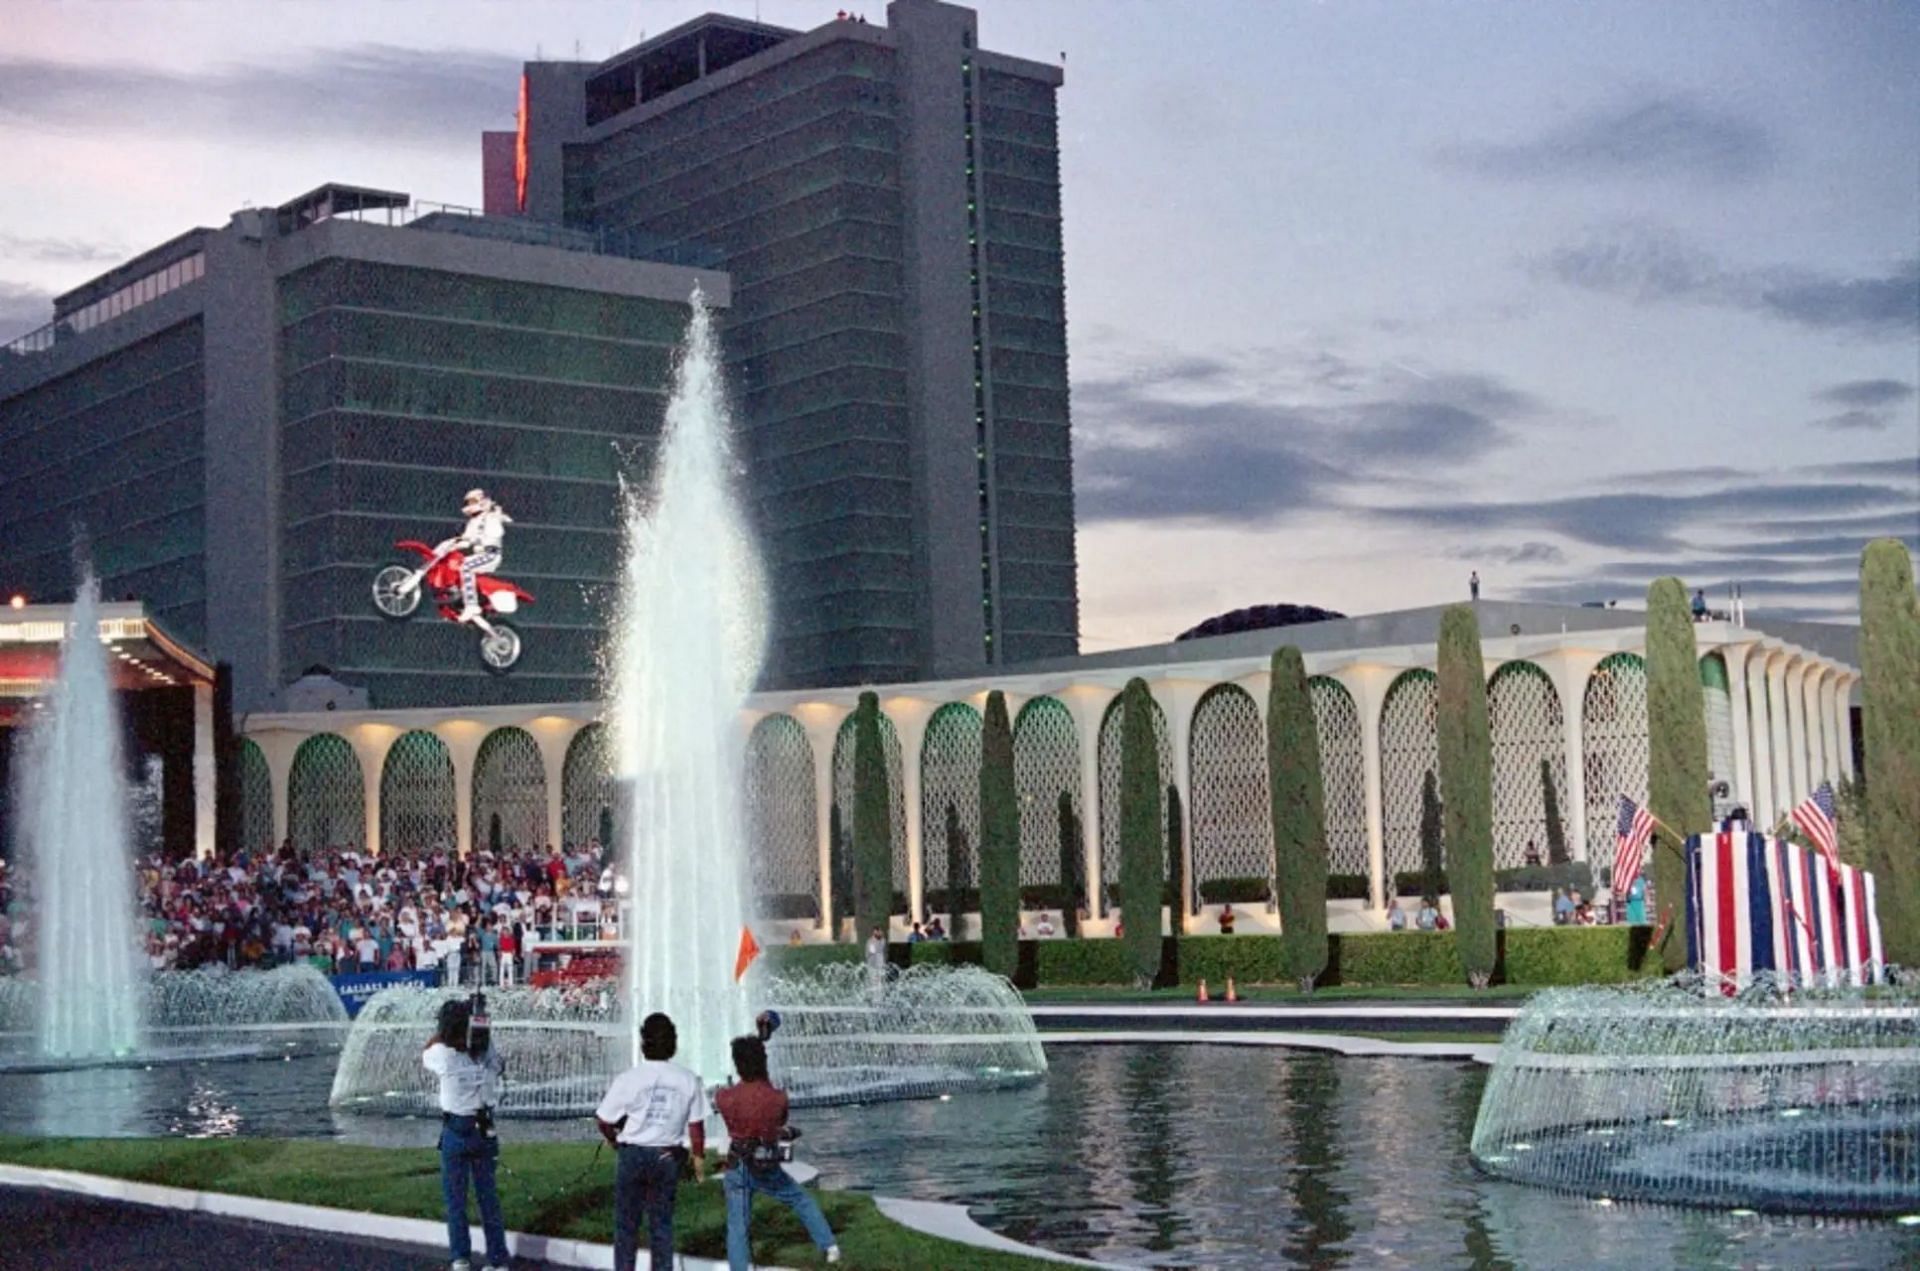 Robbie Knievel successfully performed his famous Caesar&#039;s Palace stunt in 1989, which his father was unable to succeed at (Image via Getty Images)